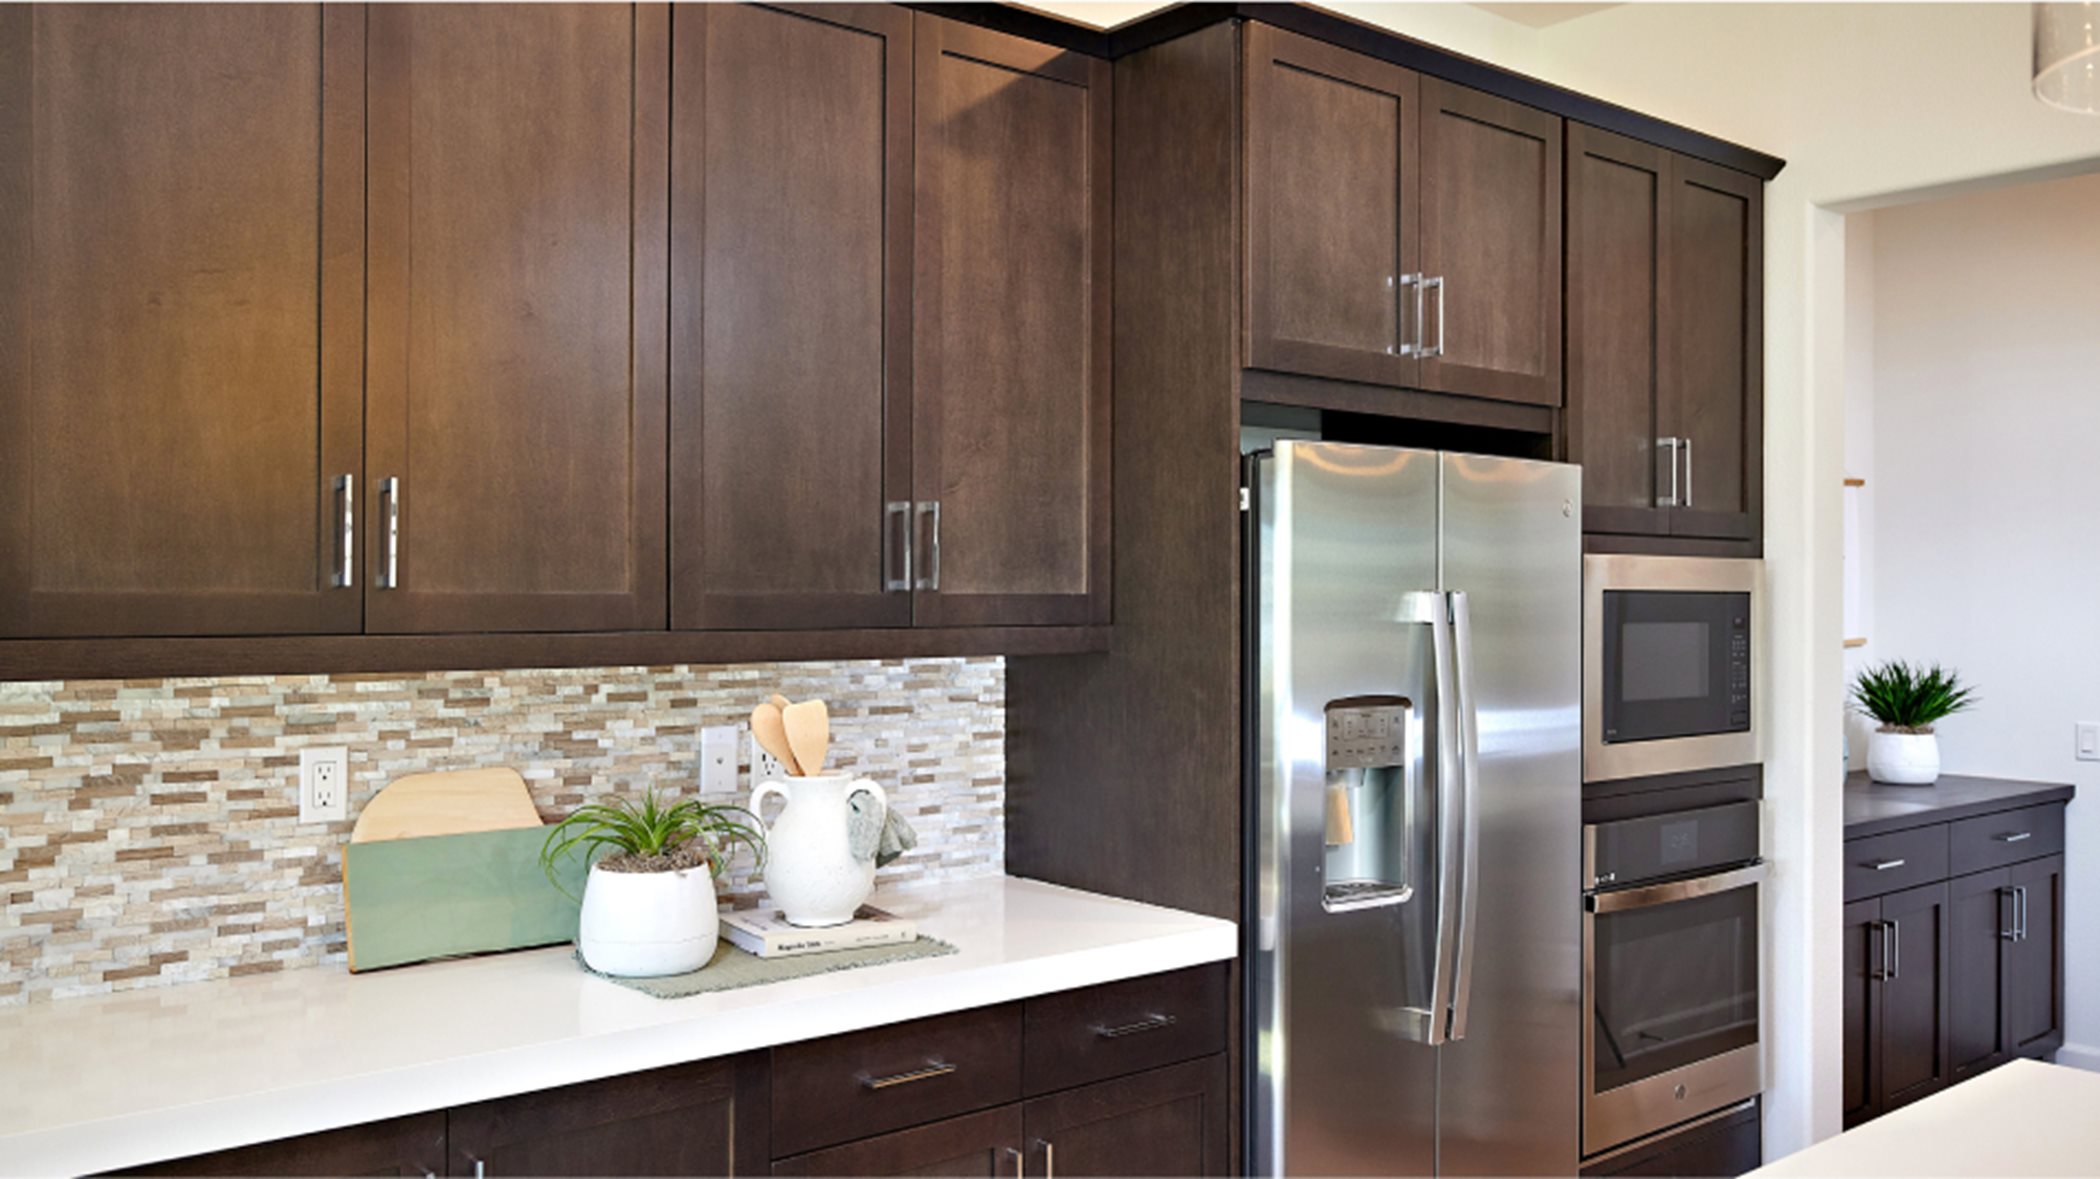 Parkside at Mission Circle Res 1 Kitchen Cabinetry